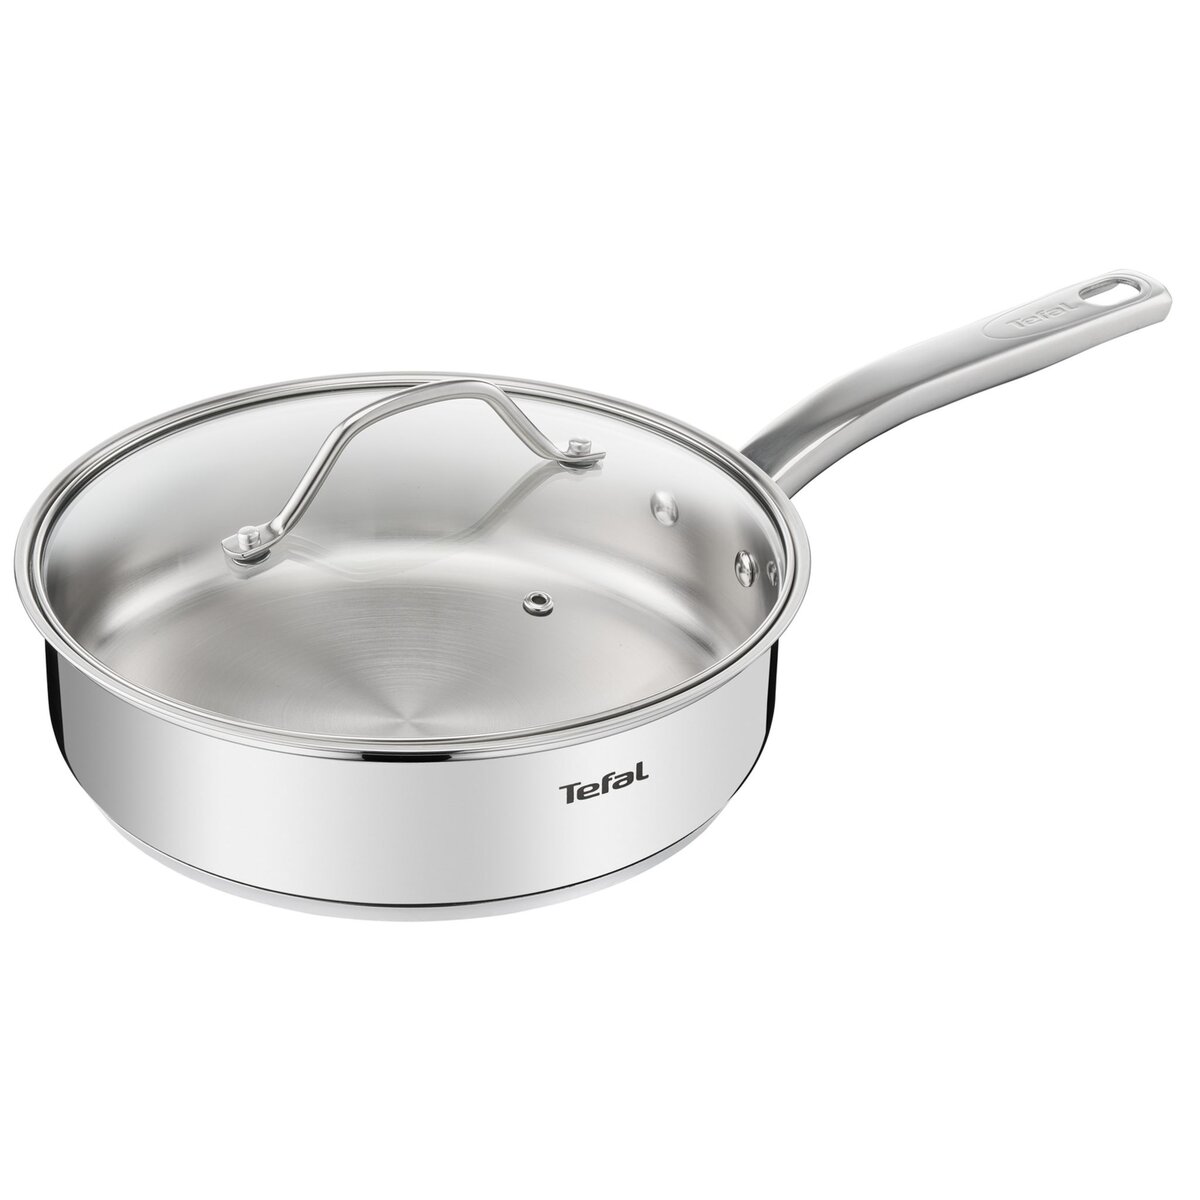 TEFAL Sauteuse induction INTUITION inox 24 cm